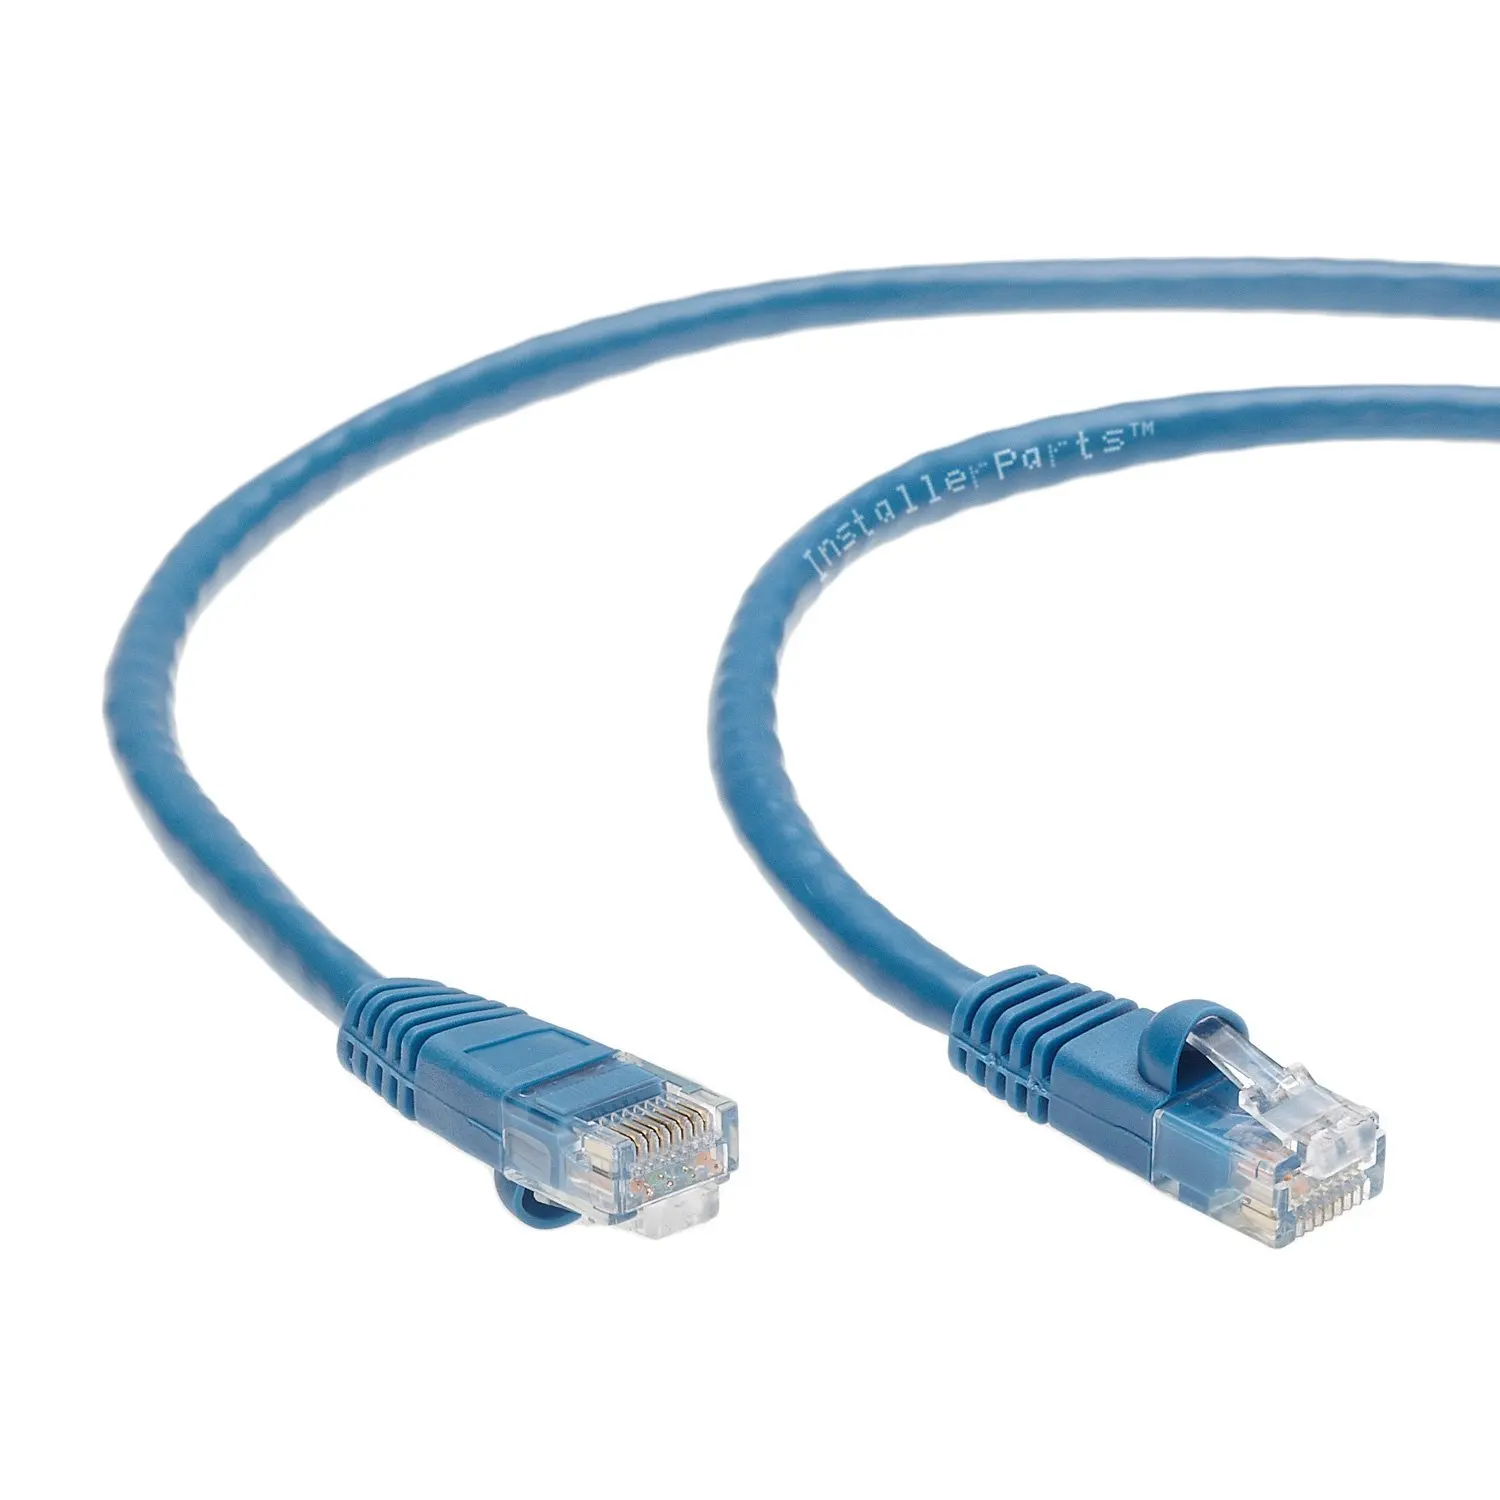 CAT5e RJ45 Ethernet Network High Speed LAN Patch Cable Wholesale 0.25M to 50M 